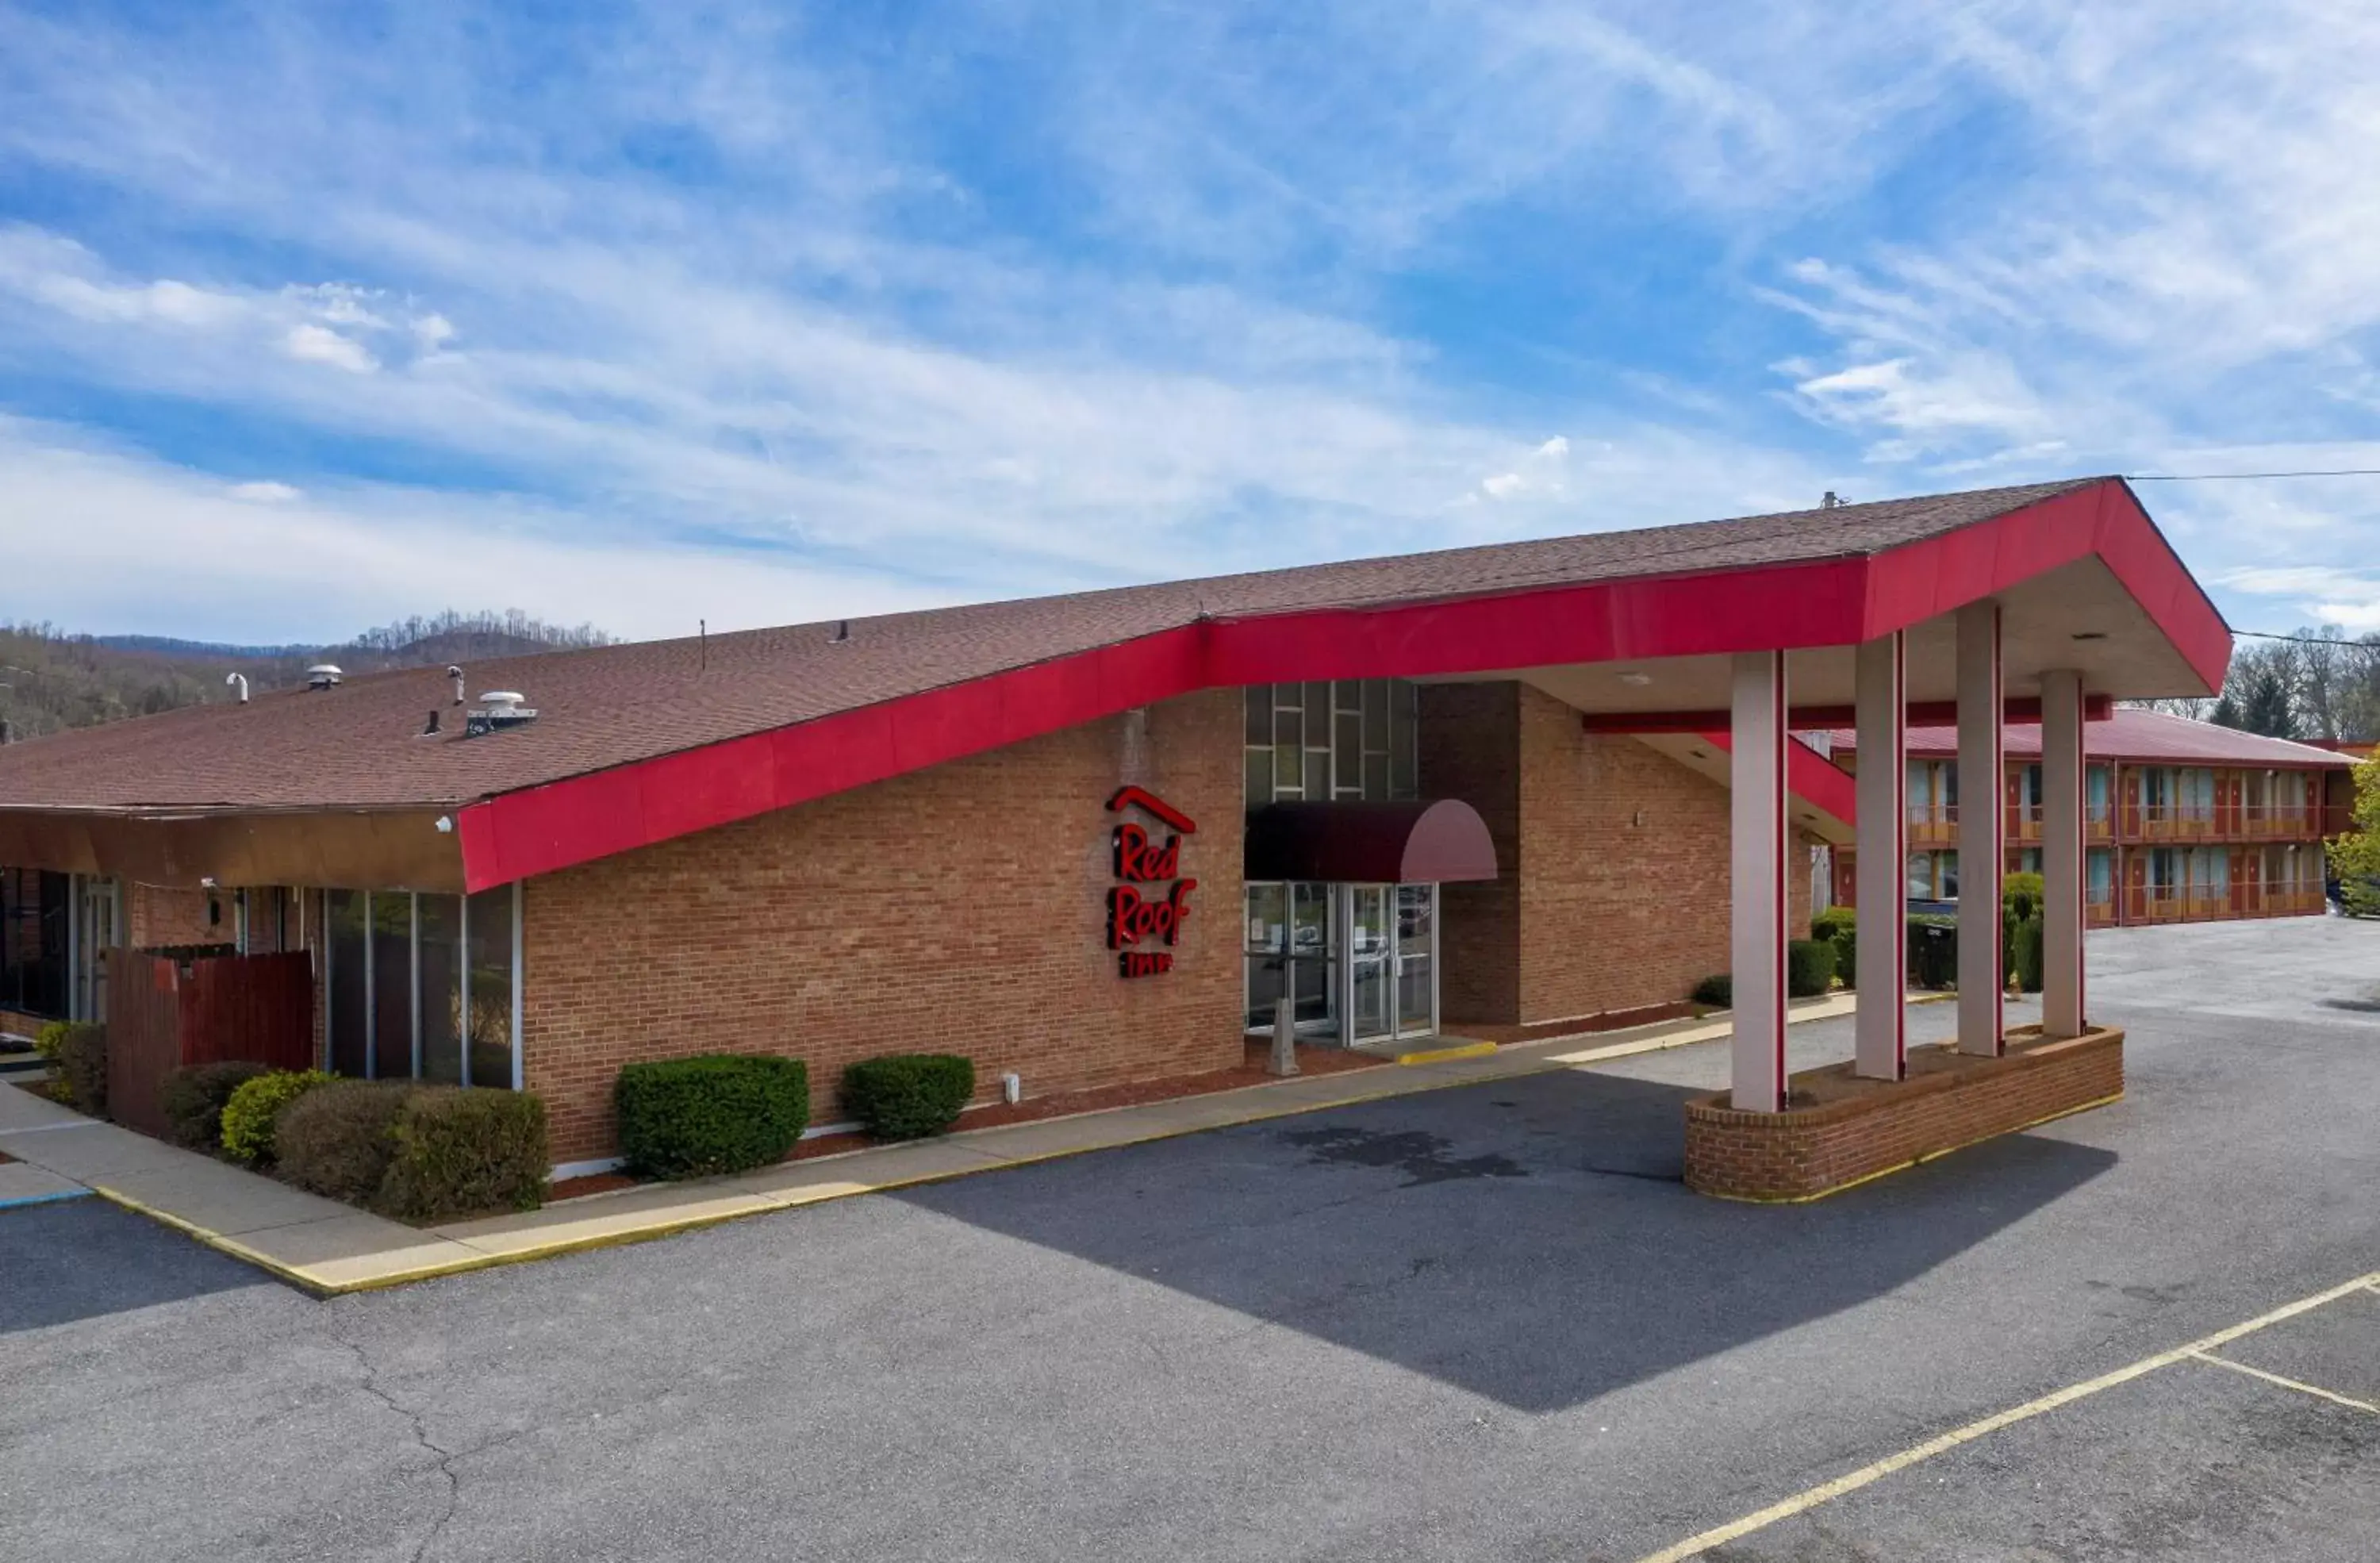 Property Building in Red Roof Inn Marion, VA